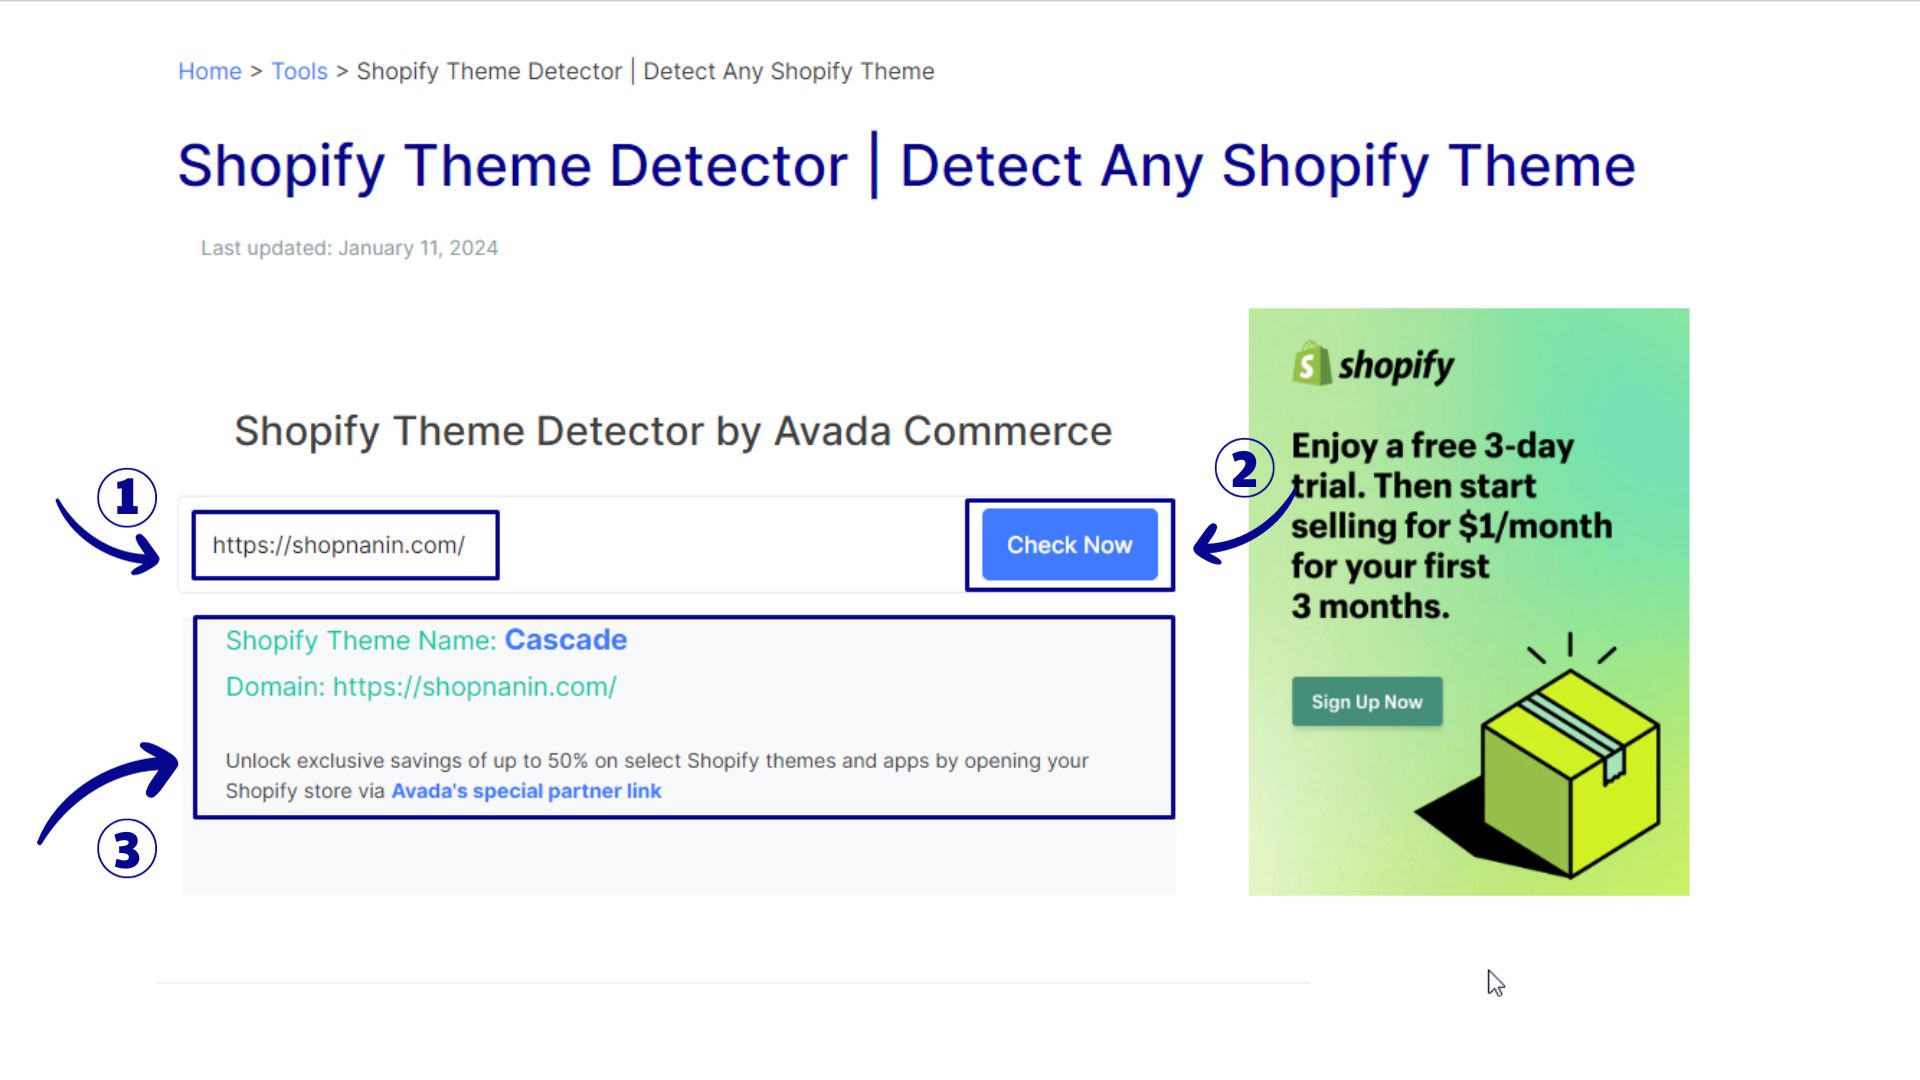 Shopify Theme Detector by Avada Commerce